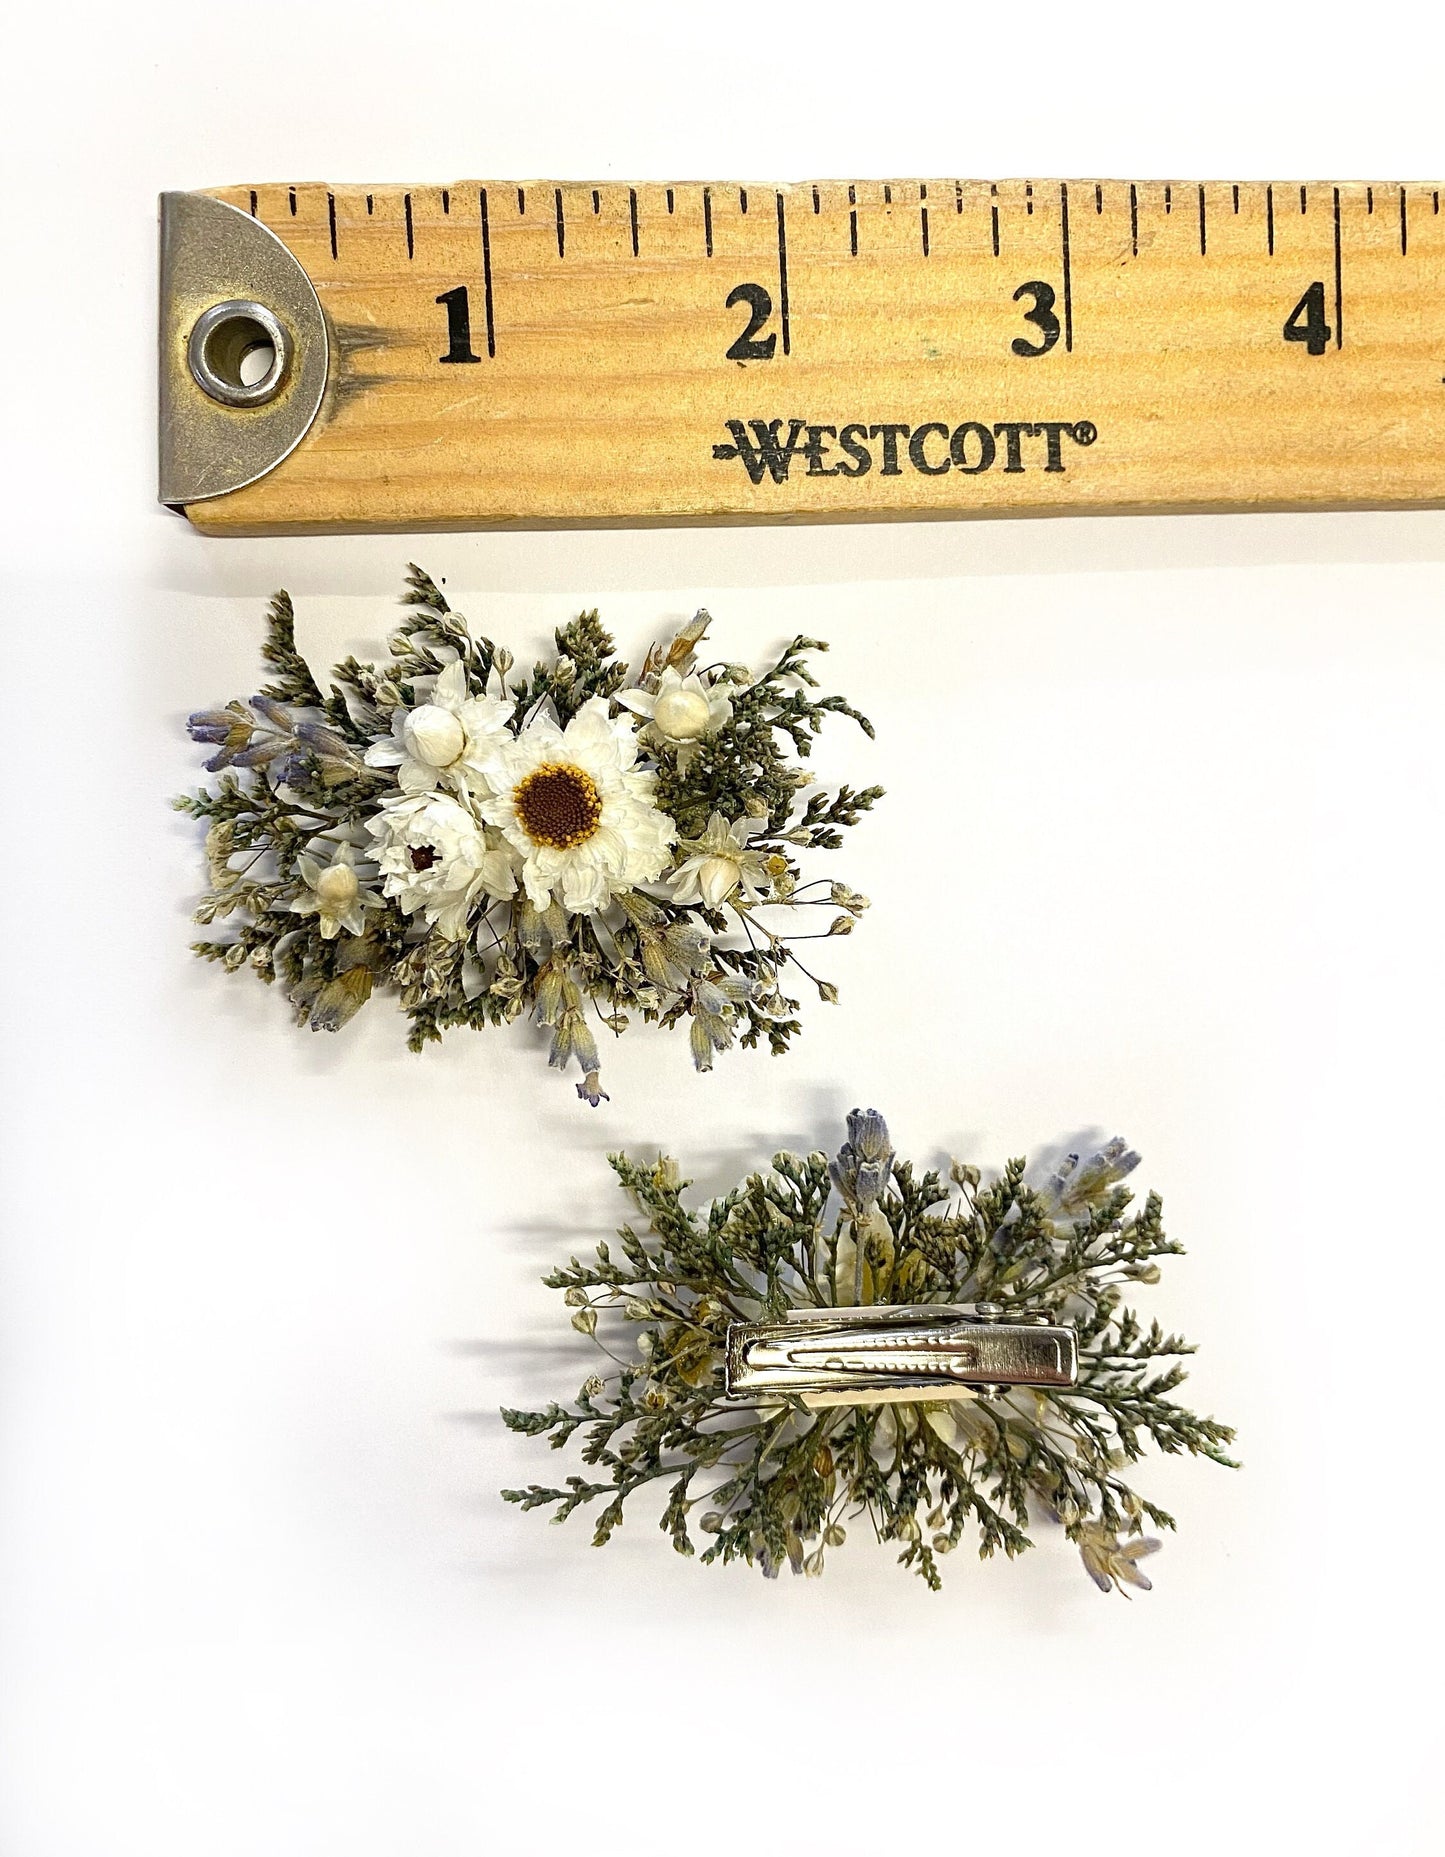 Hair Comb, Hair Pins, Dried flowers, Preserved, Floral Comb, Clip, Wedding, Corsage, Prom, Bridal, Green, White